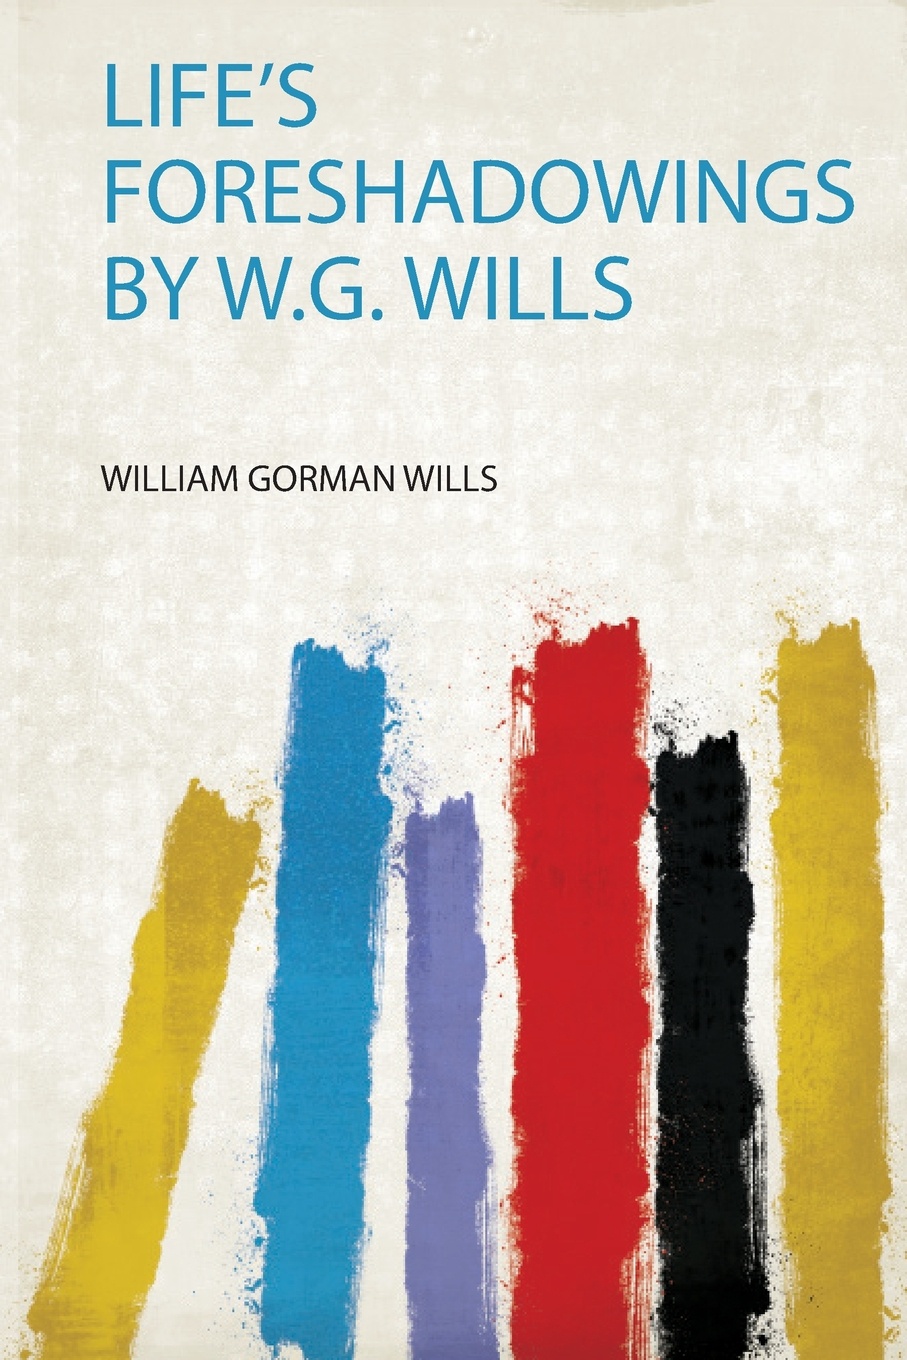 Life`s Foreshadowings by W.G. Wills